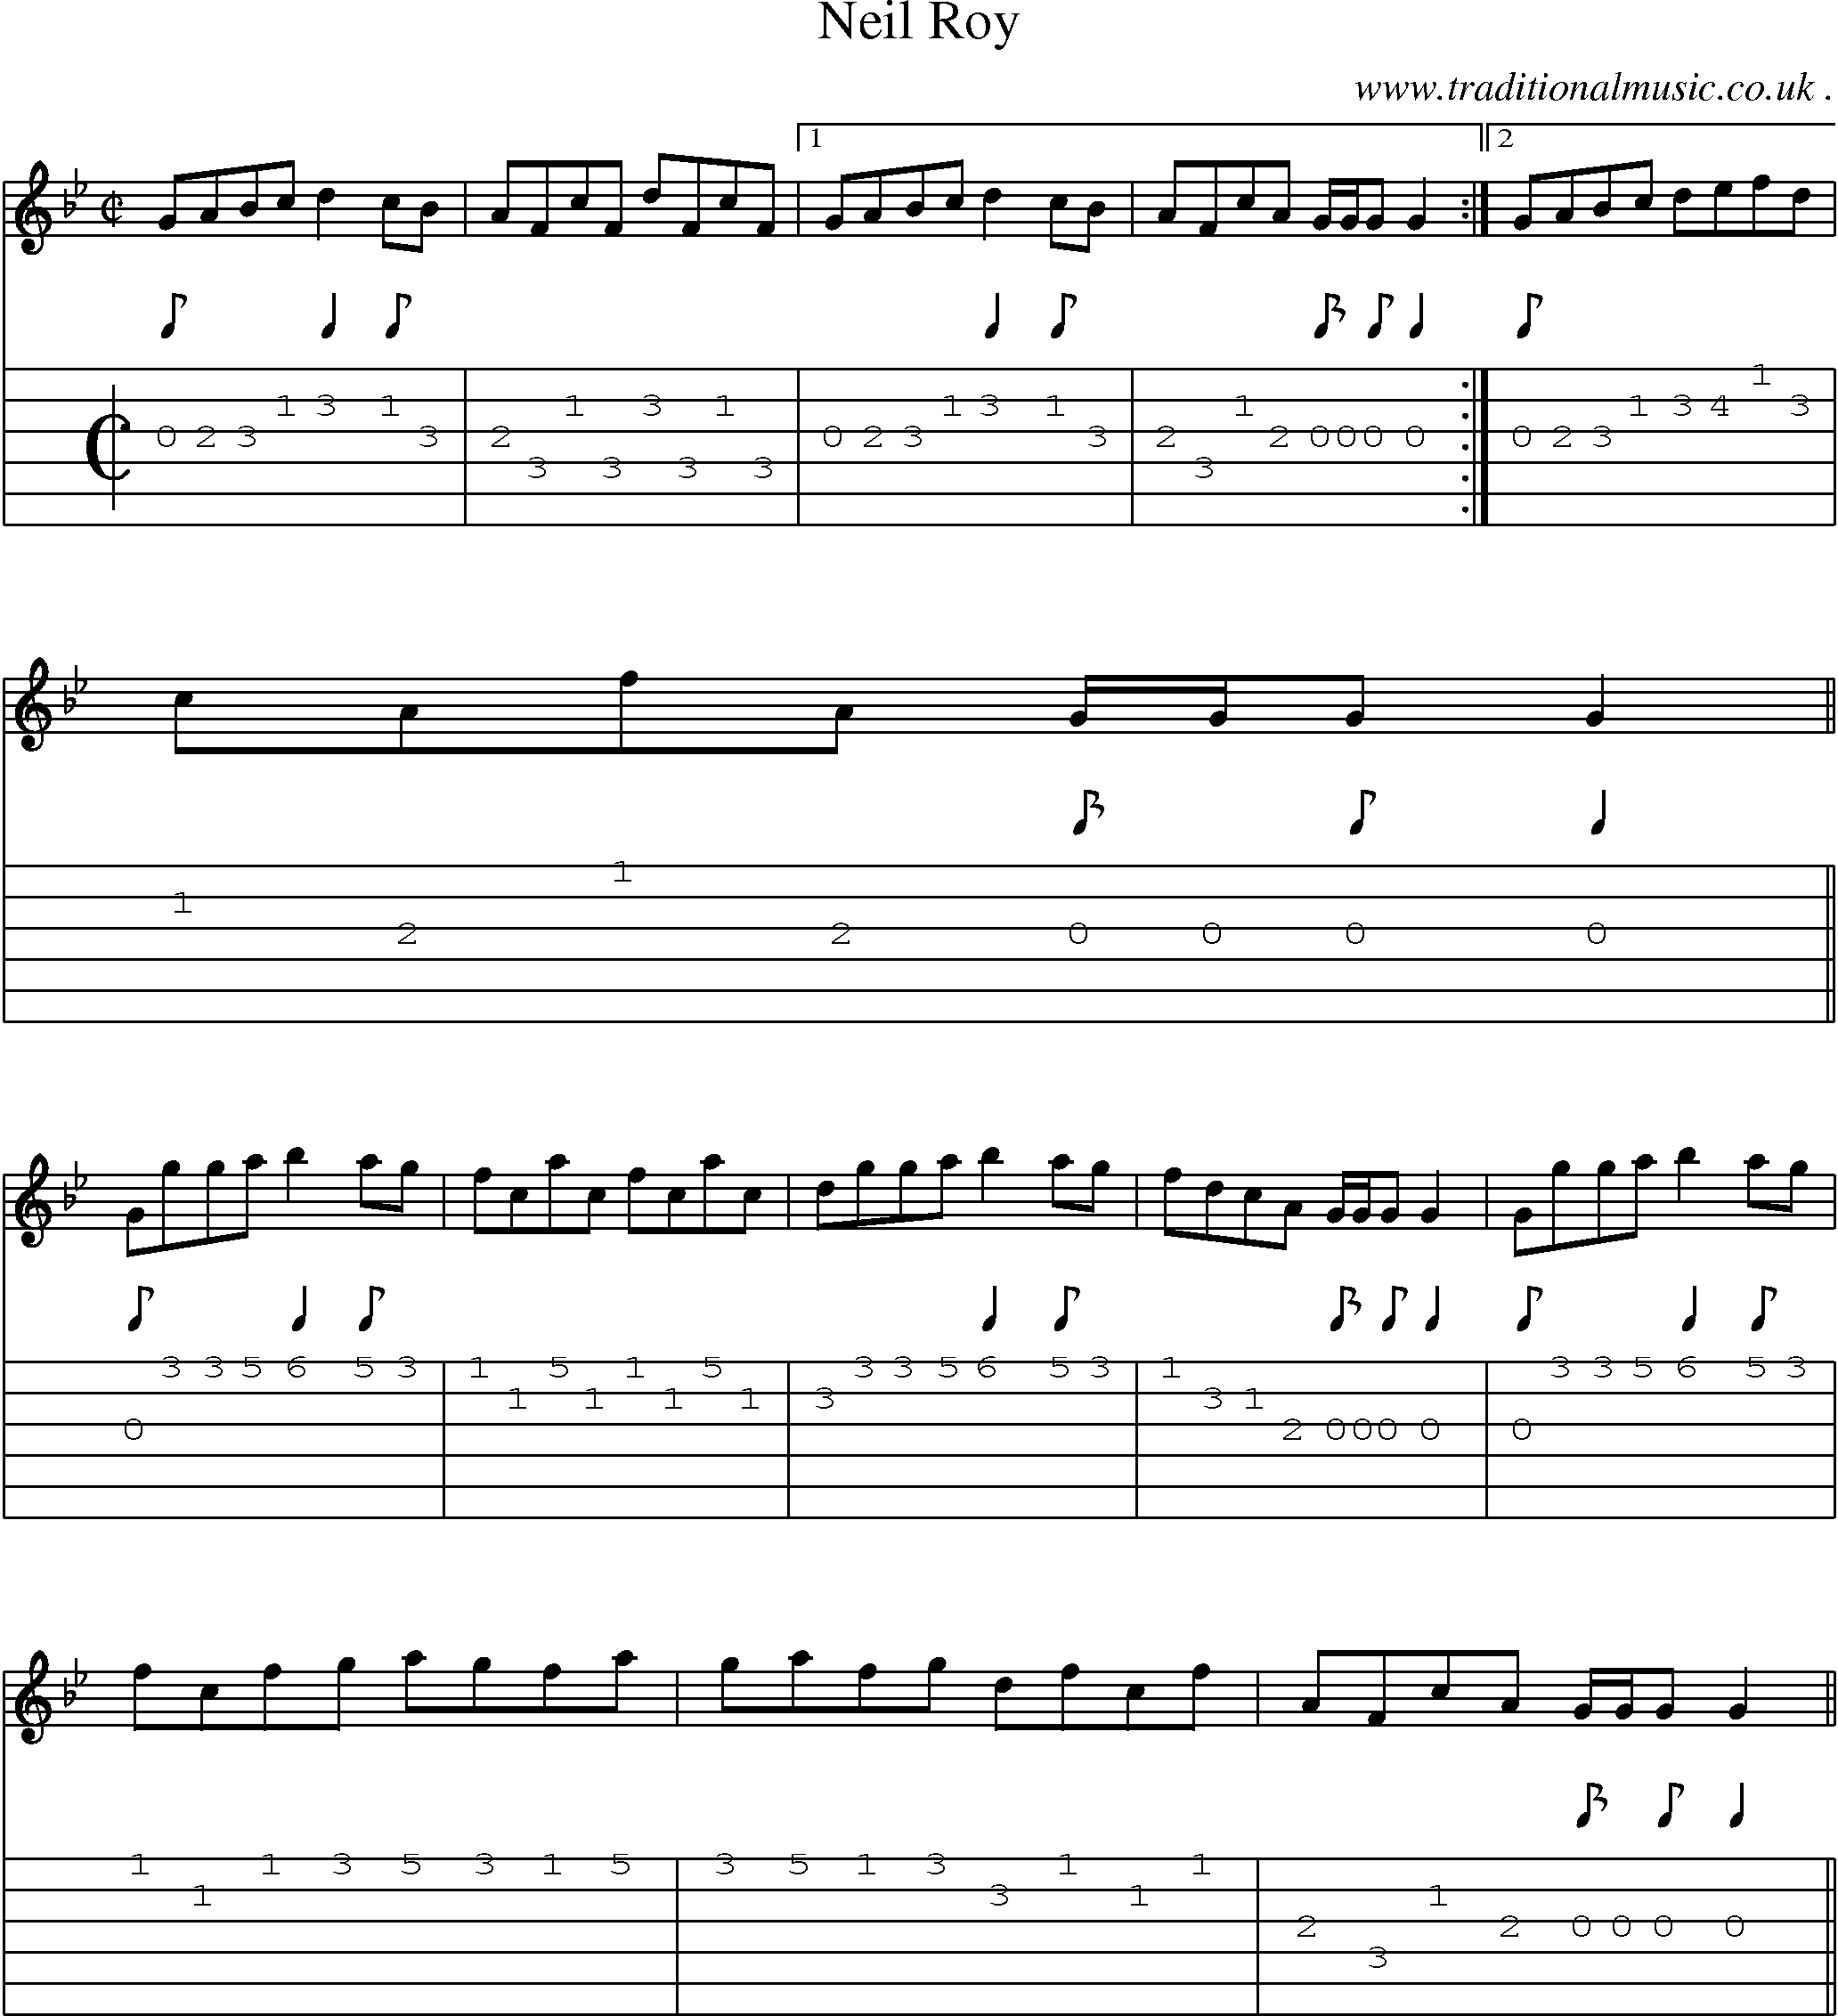 Sheet-music  score, Chords and Guitar Tabs for Neil Roy